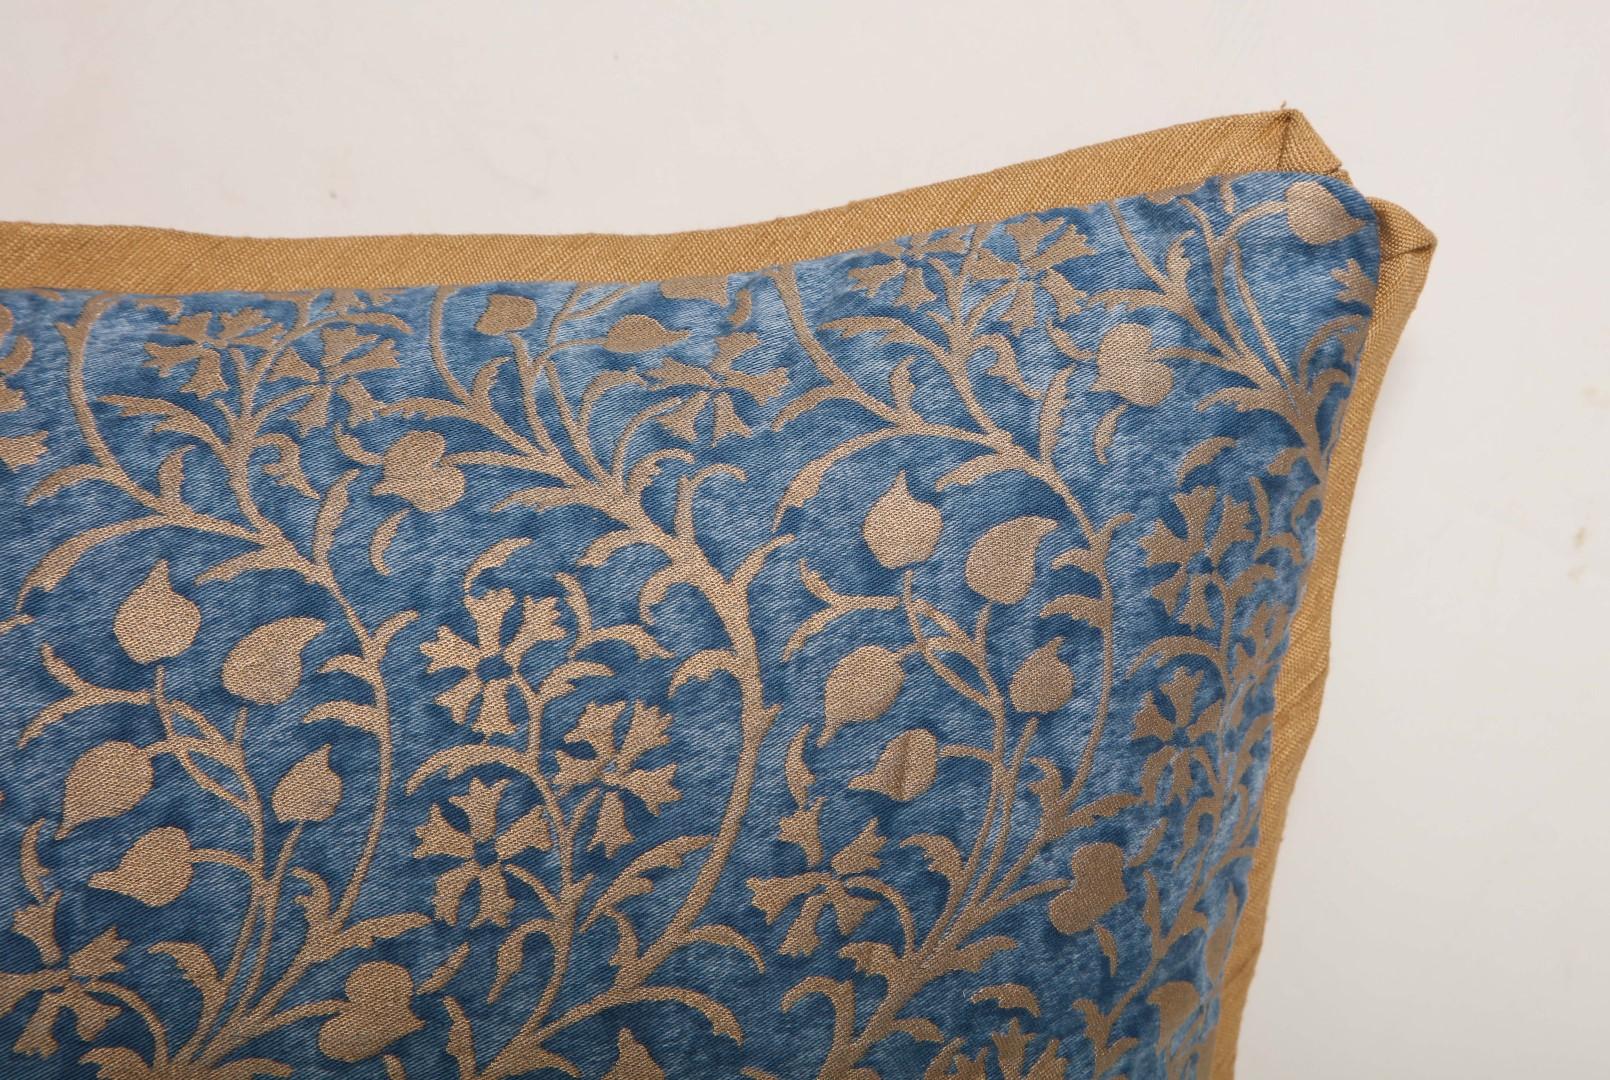 Contemporary Pair of Fortuny Fabric Cushions in the Granada Pattern